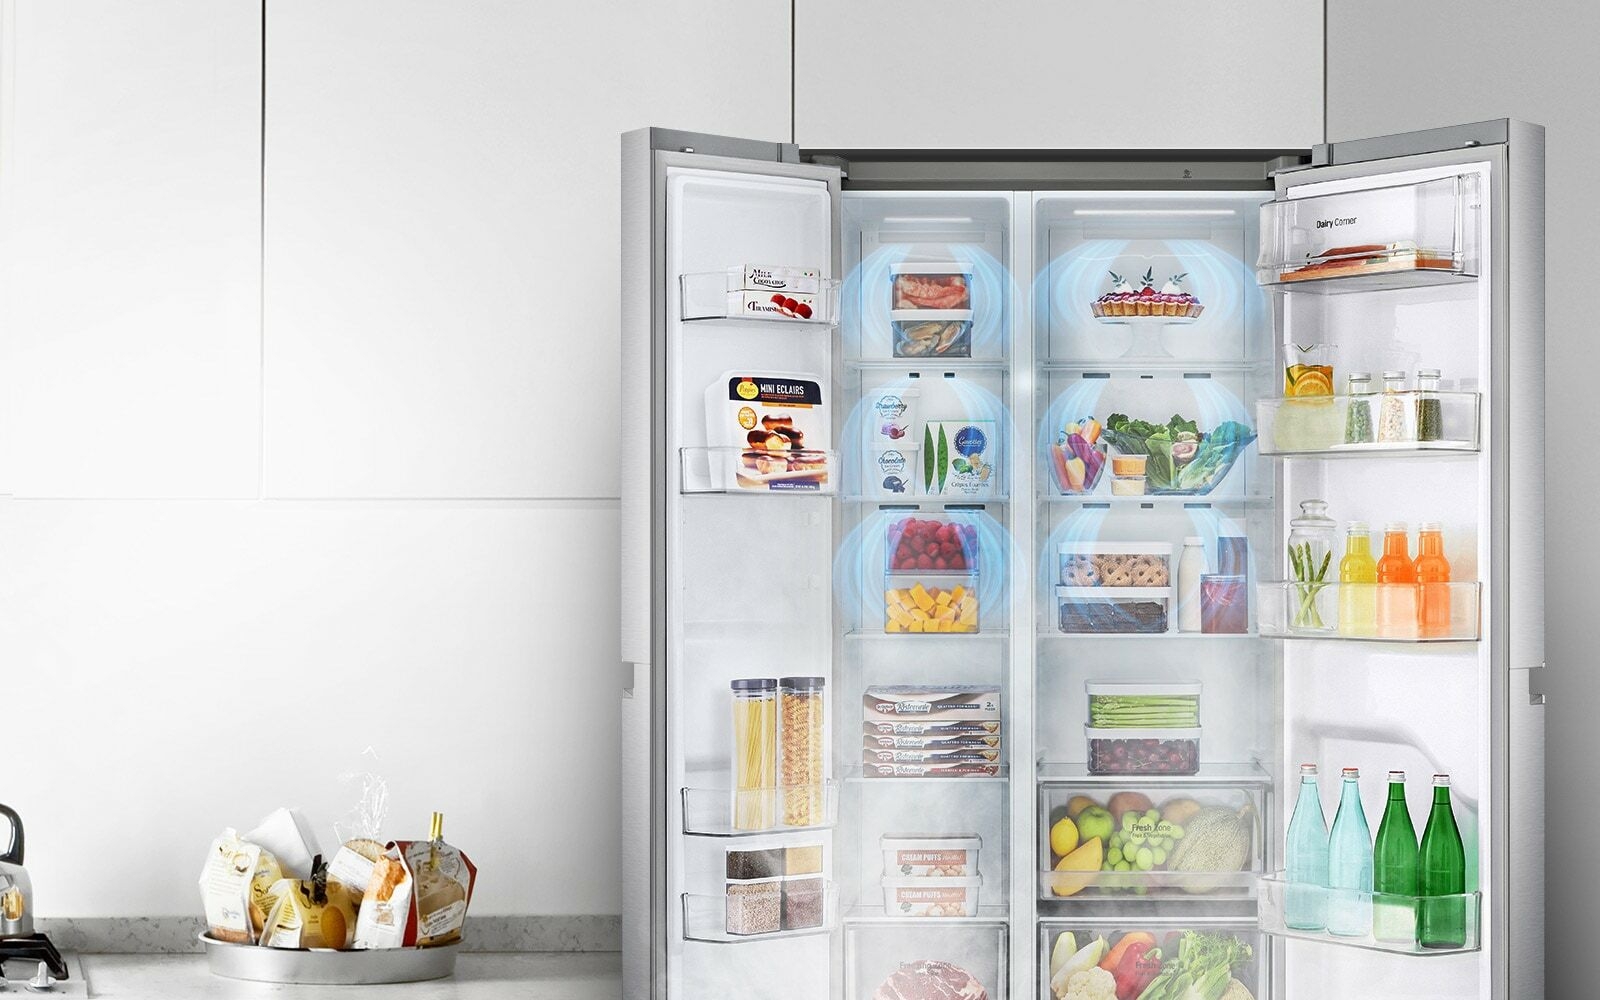 A front view of the refrigerator with the two front doors wide open showing a full stocked fridge. Blue clouds of mist are shown going down over all of the produce.